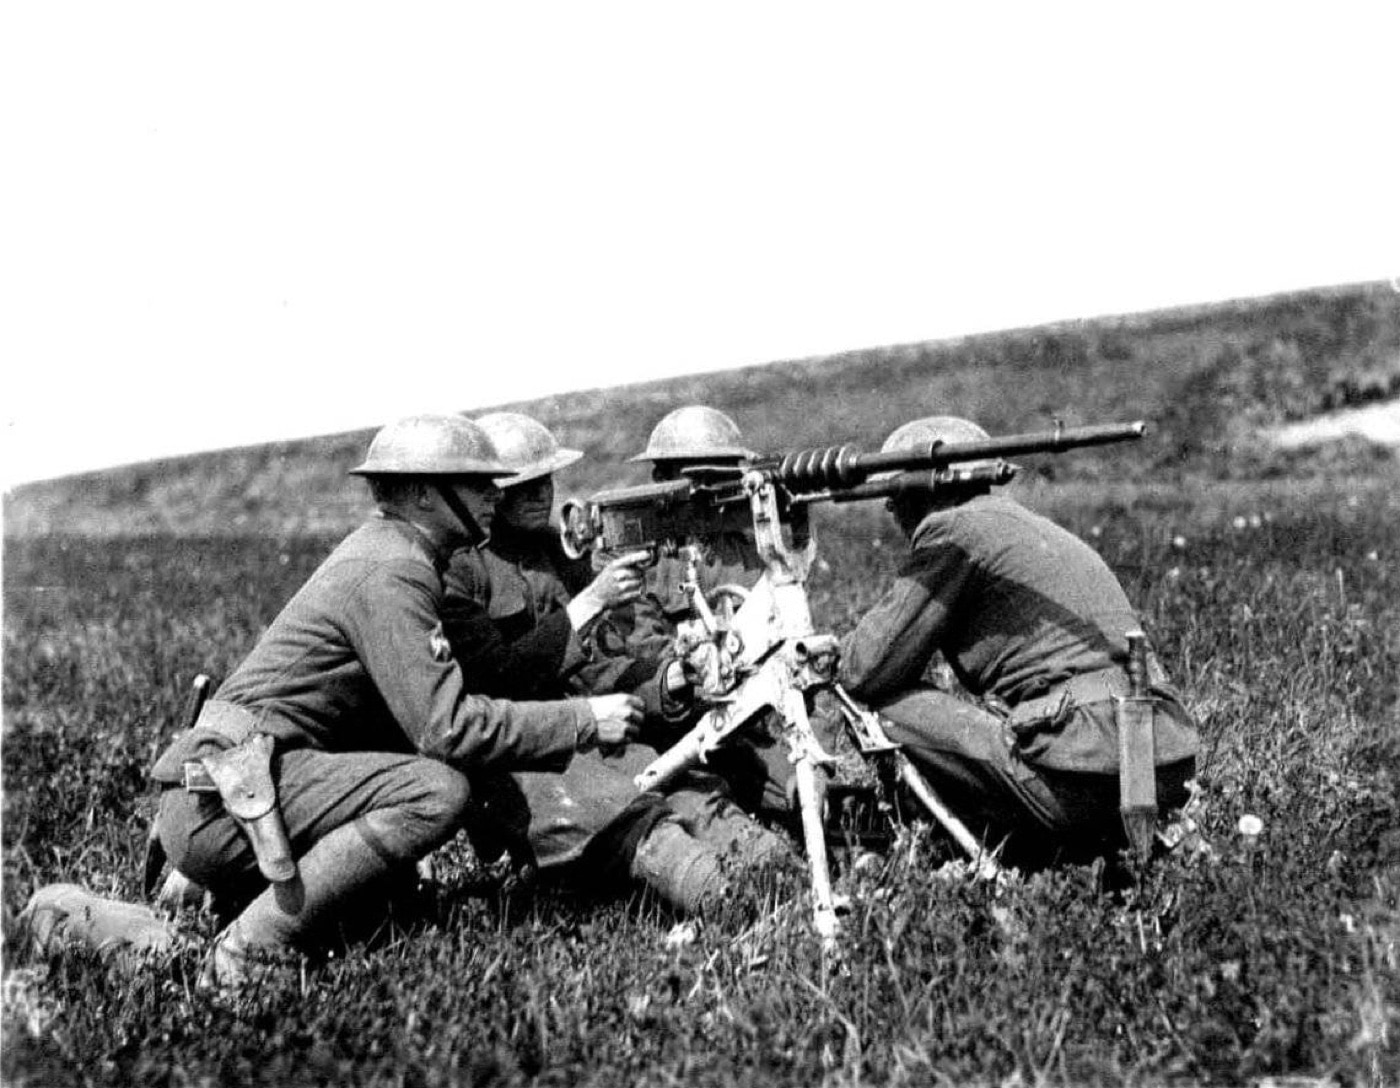 A U.S. Army machine gun team is captured in this photo. They are operating a Hotchkiss m1914 standard machine gun at a firing range in France during May 1918. The four man team recently arrived in Europe to support the British and French Army during World War I. You can see the gun's tripod and ammo feed strips.